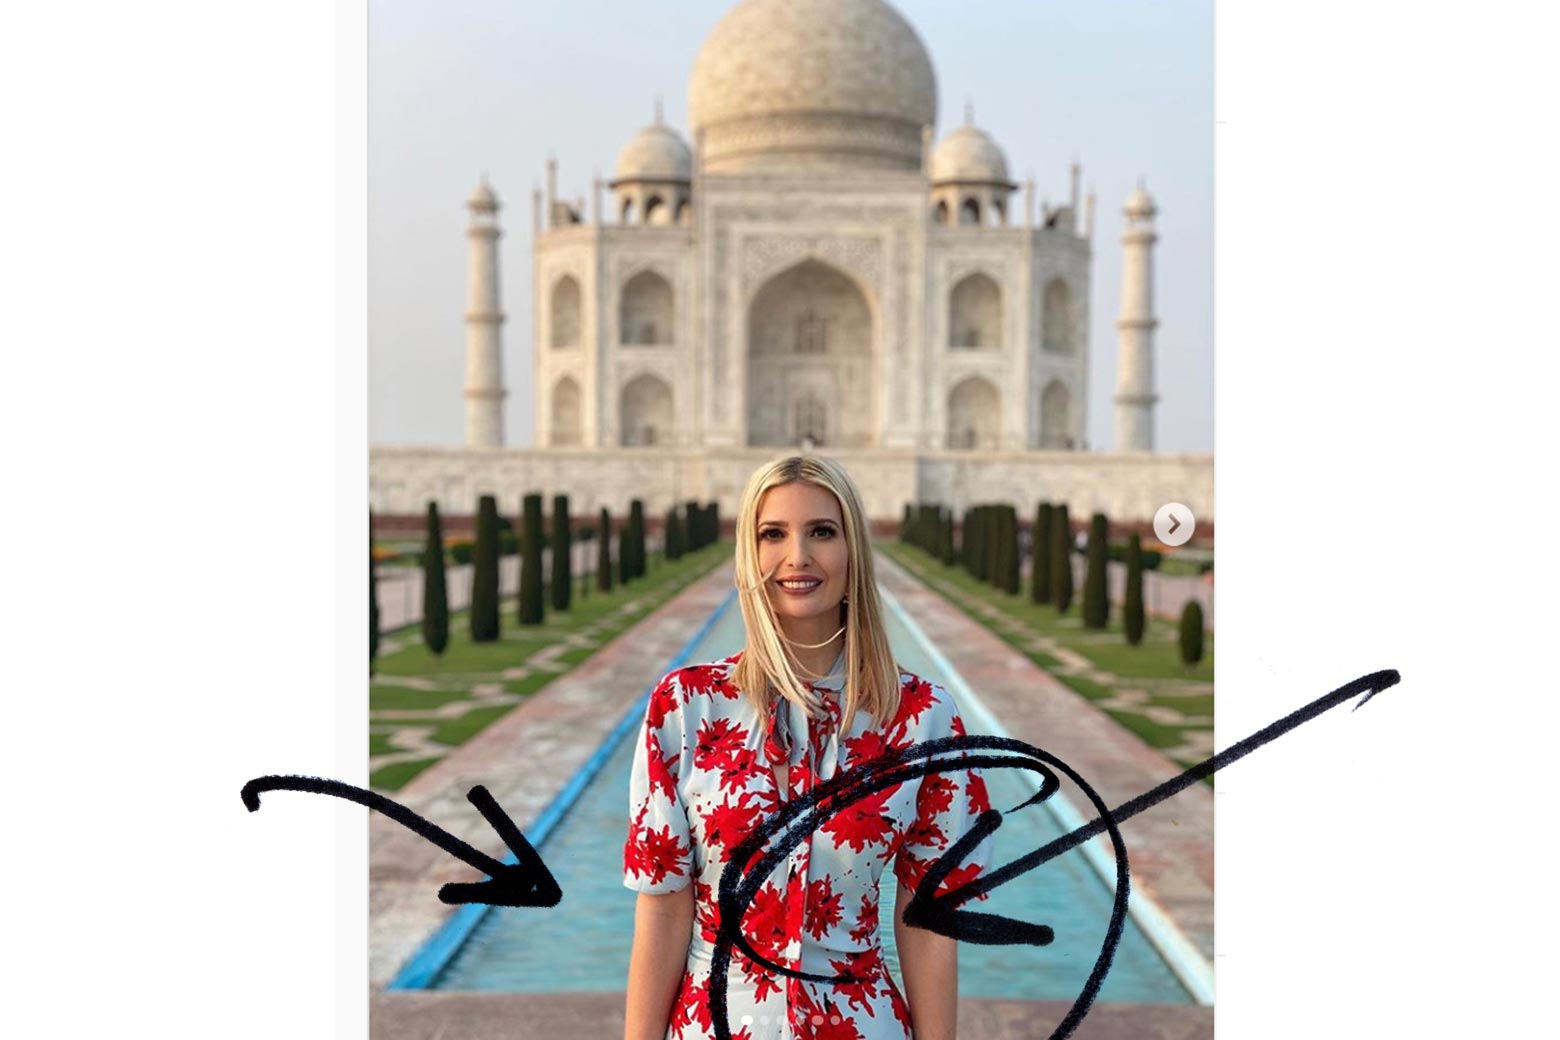 Ivanka Trump stands in front of the reflecting pool at the Taj Mahal, but there are ripples between her arm and waist that do not match the blurred water behind her.